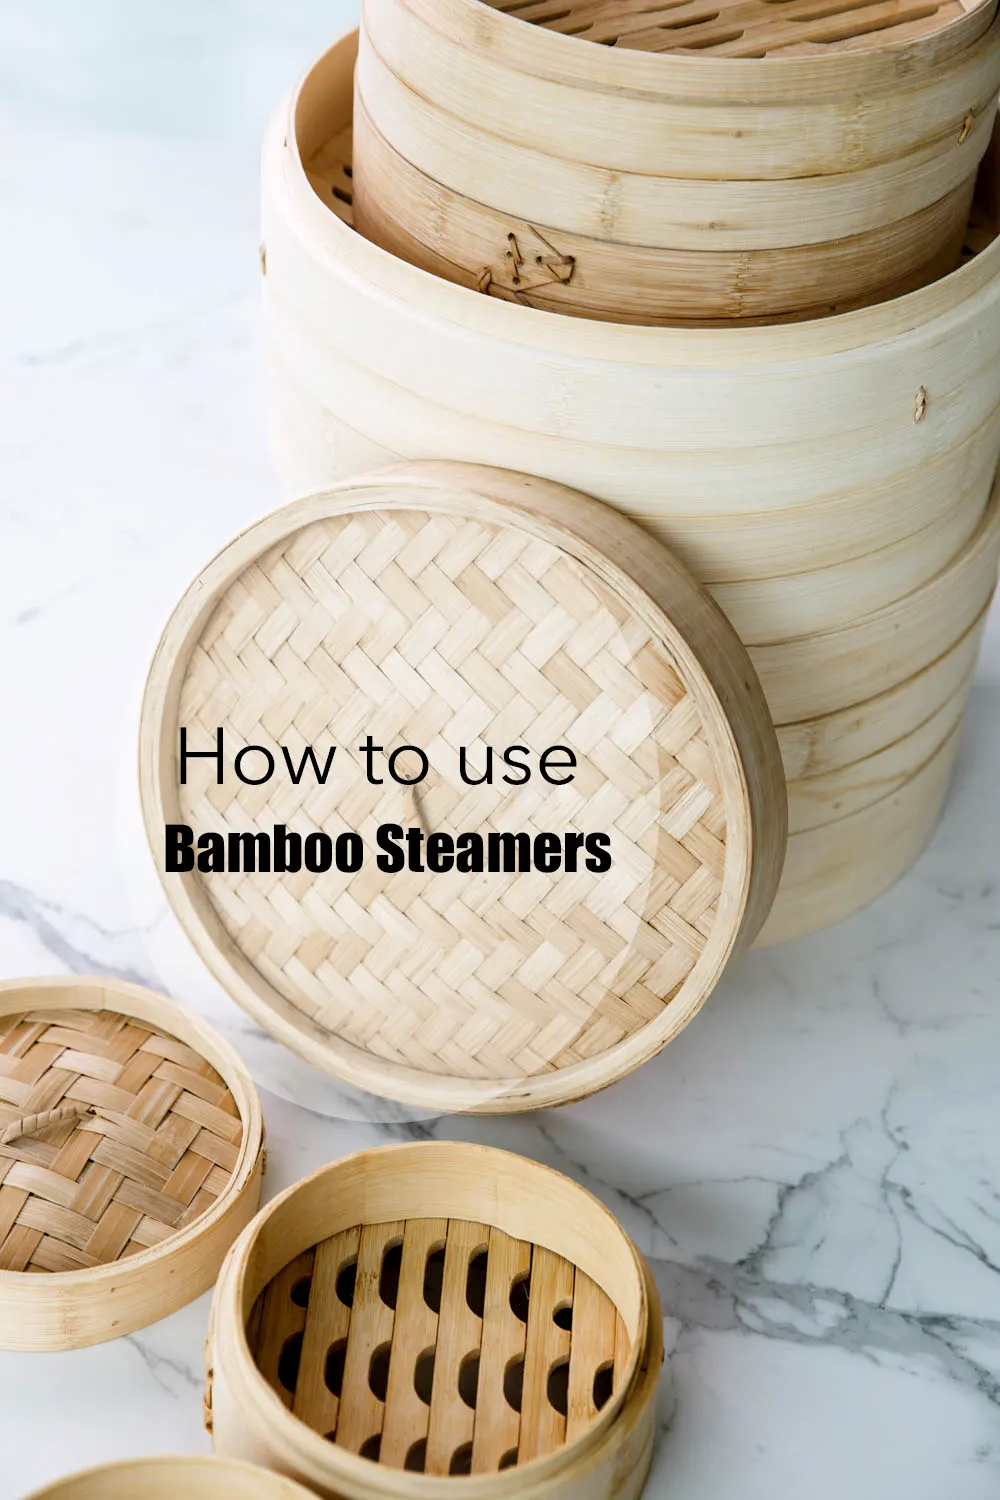 How to Use a Steamer Basket